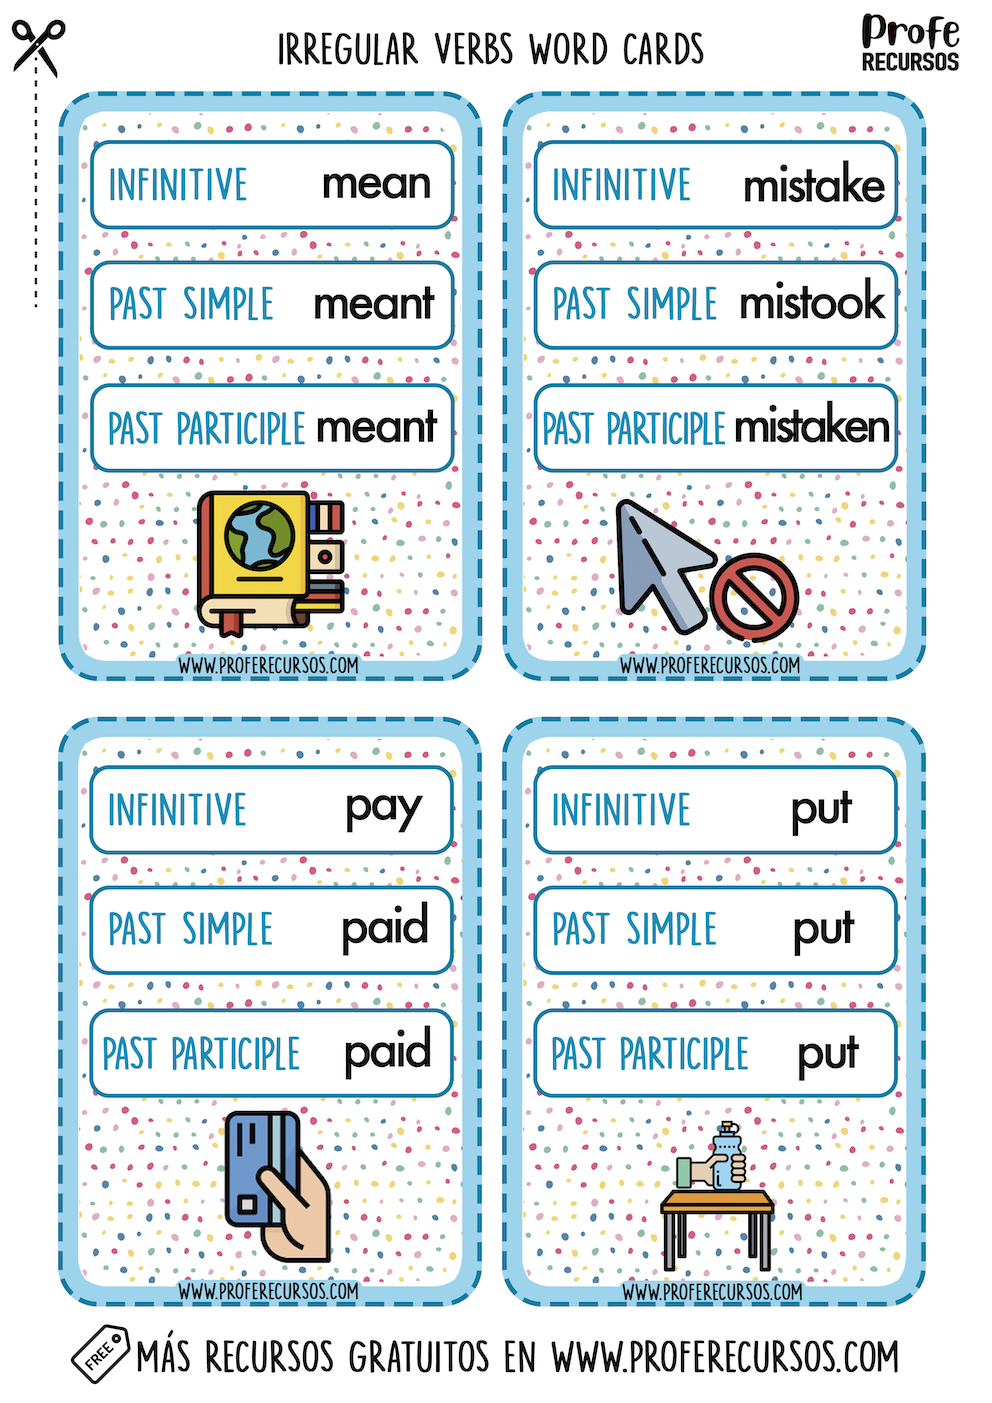 Irregular verbs with icons